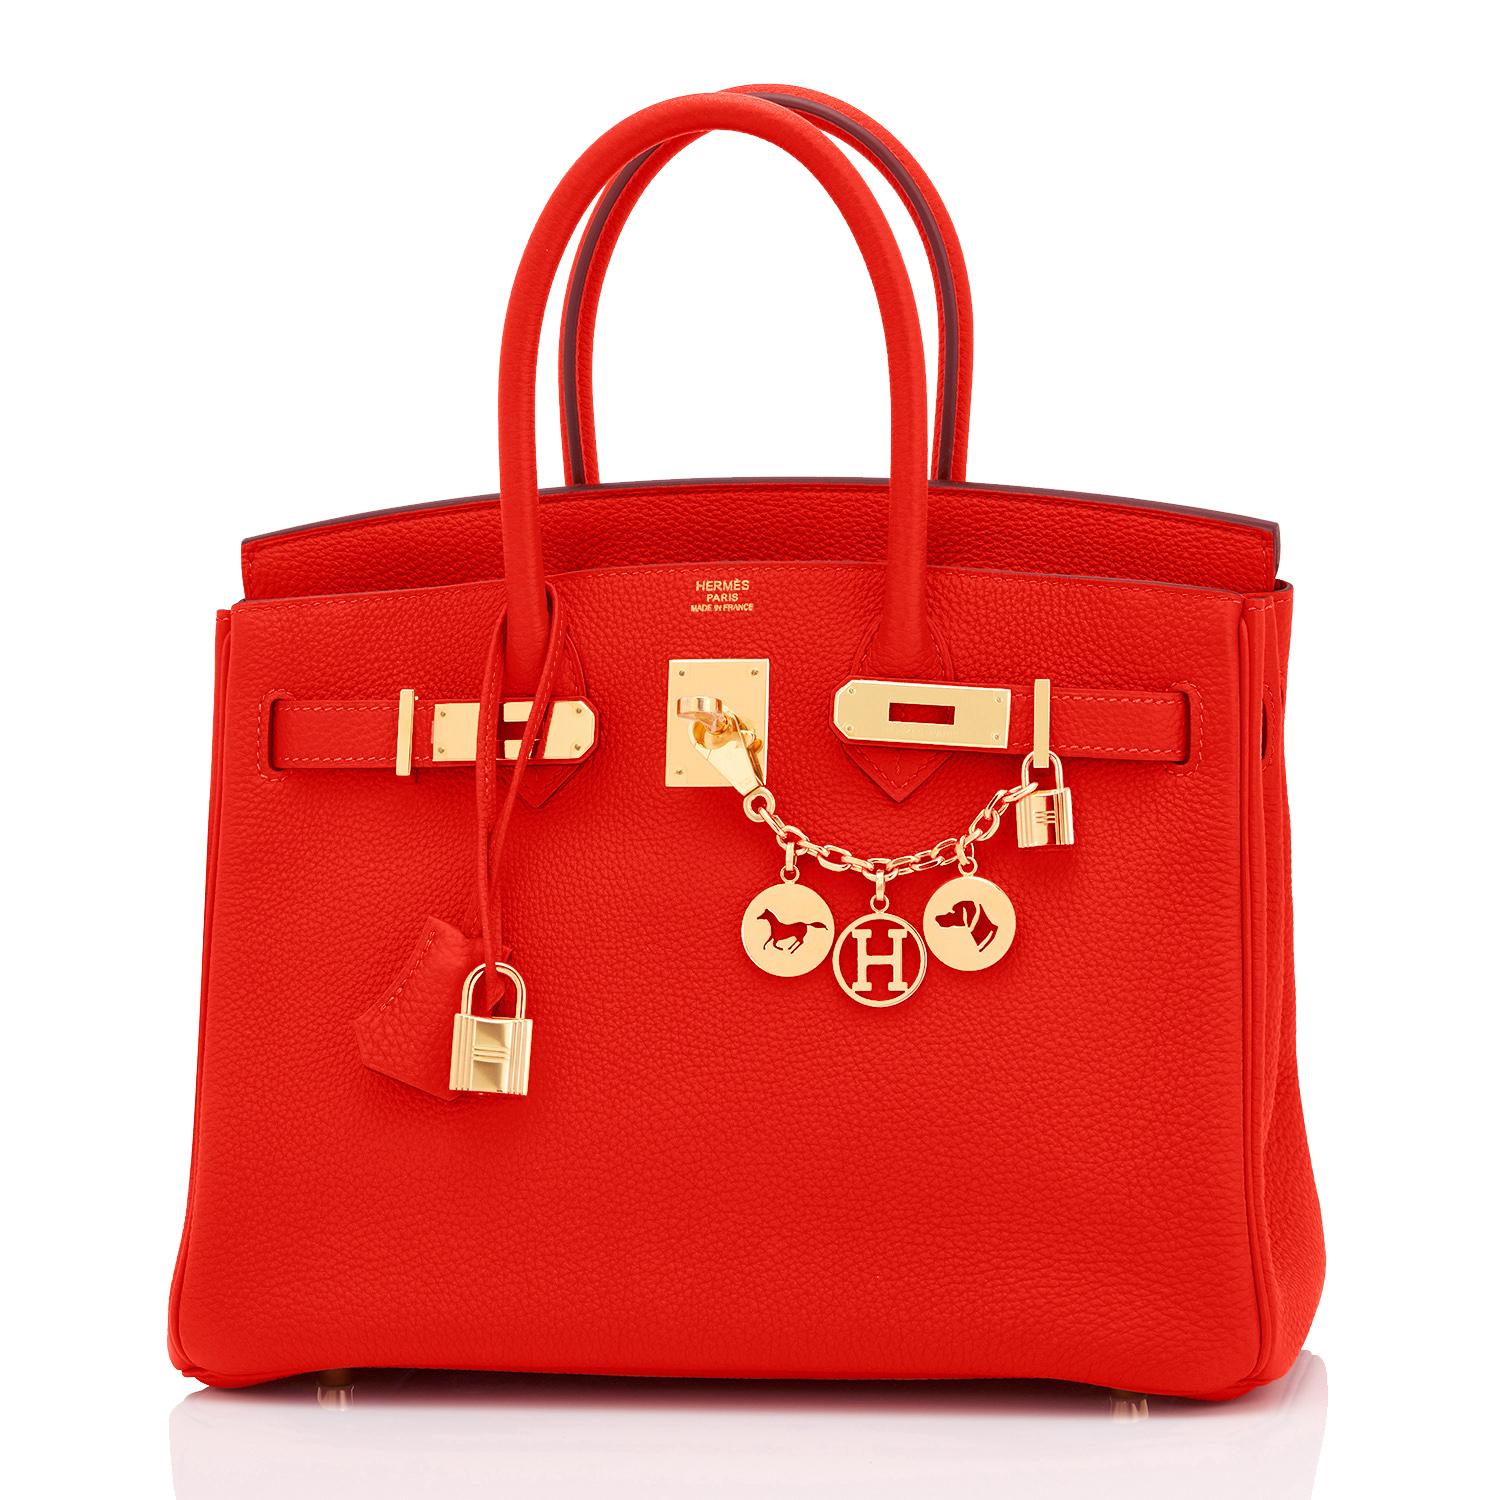 Hermes Capucine Red Orange 30cm Togo Birkin Bag Gold Hardware 
Rare find in New or Never Worn, Pristine Condition (with plastic on hardware)
Perfect gift! Comes in full set with lock, keys, clochette, sleeper, raincoat, and orange Hermes box.